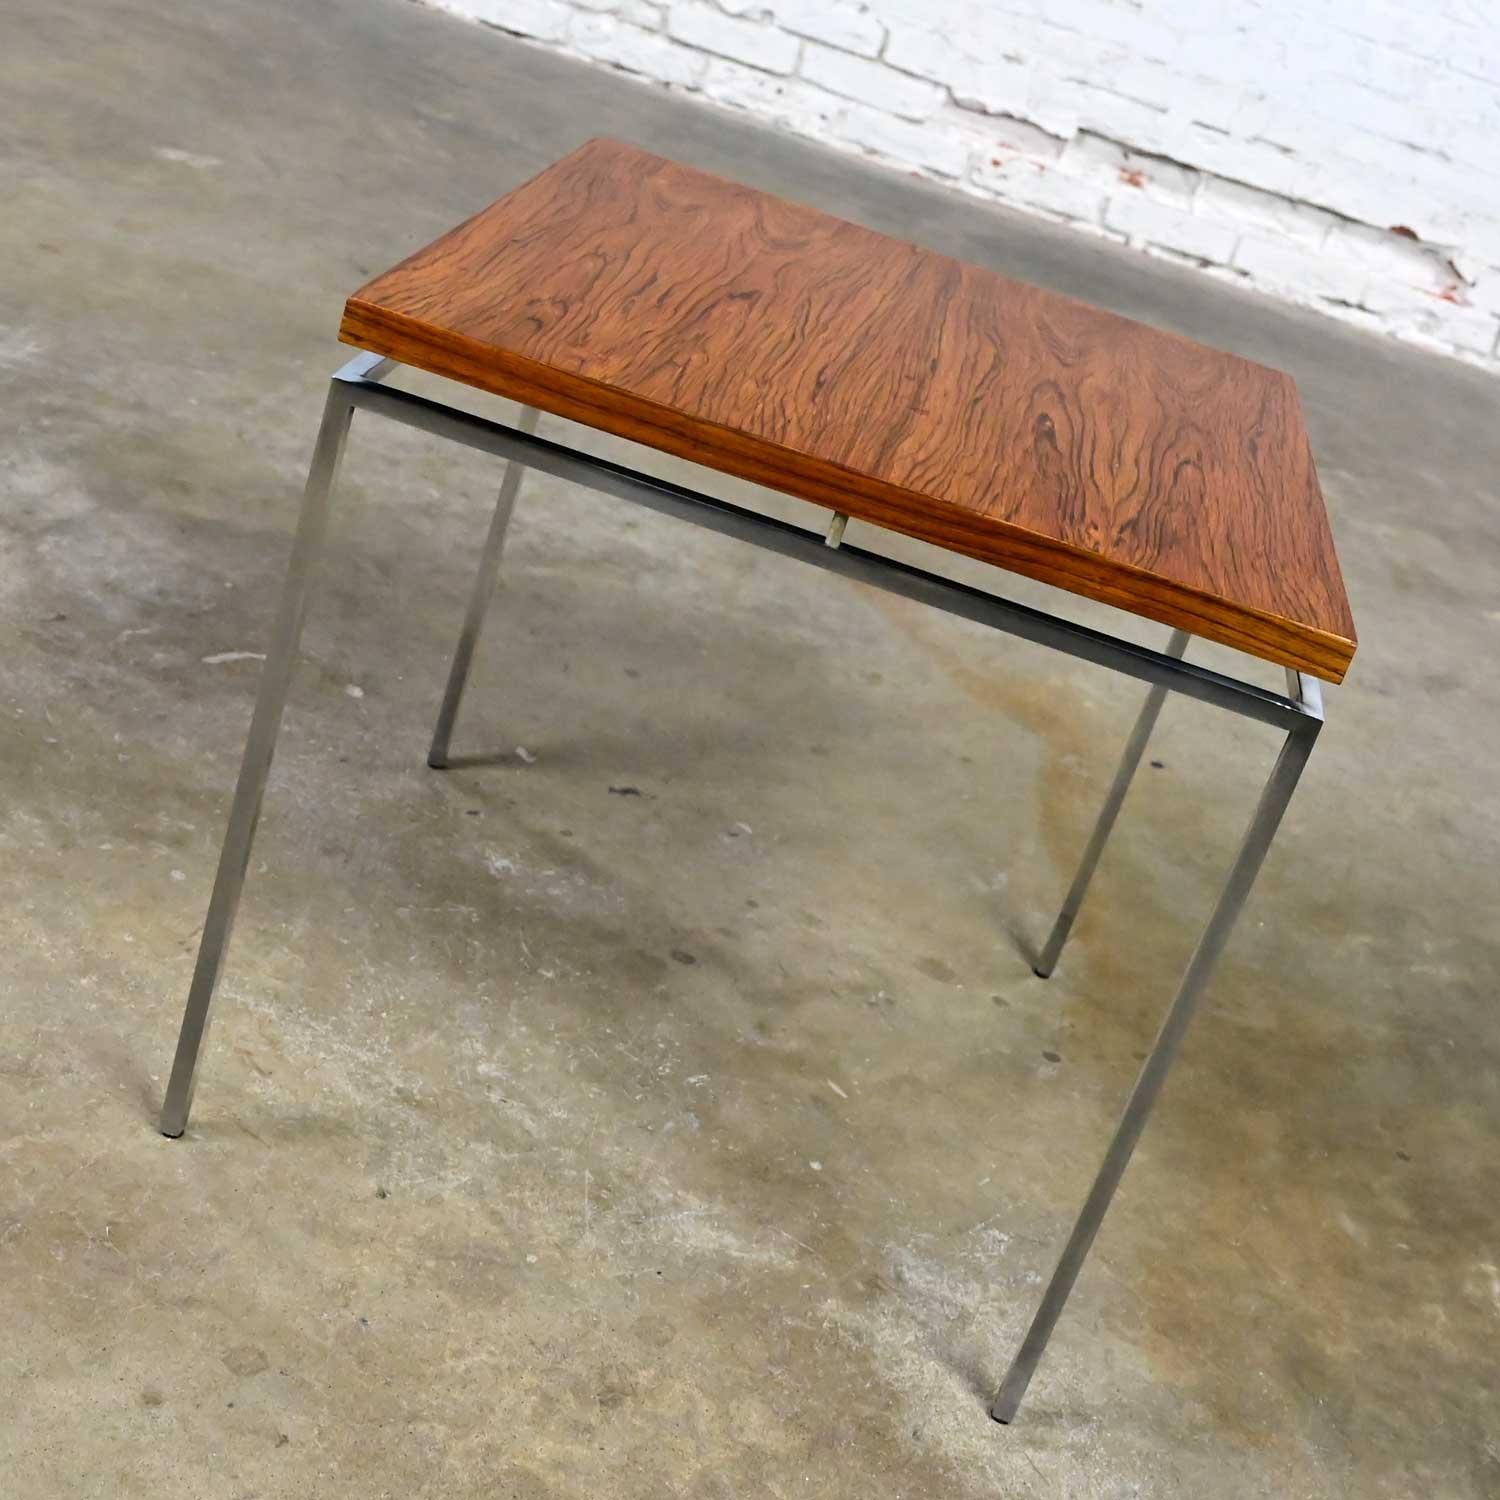 Sleek vintage Scandinavian Modern solid rosewood & chrome minimalist end table with floating top by Knud Joos for Jason Mobler. Beautiful condition, keeping in mind that this is vintage and not new so will have signs of use and wear. The aluminum